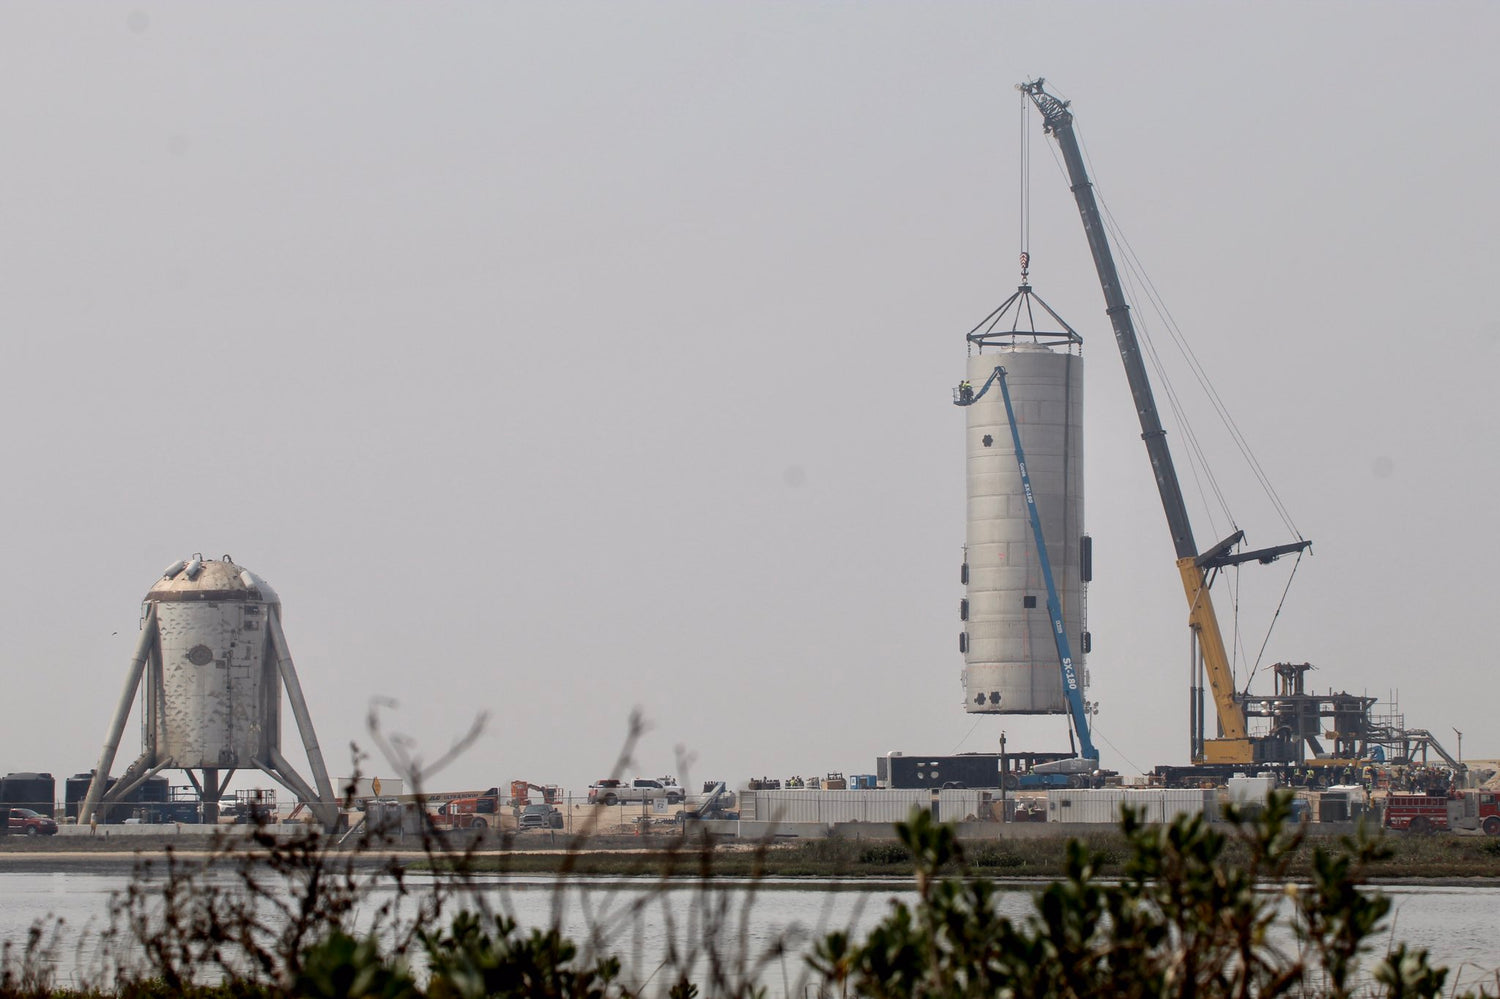 SpaceX South Texas prepares to pressure test Starship SN4, as SN5 is rapidly under construction